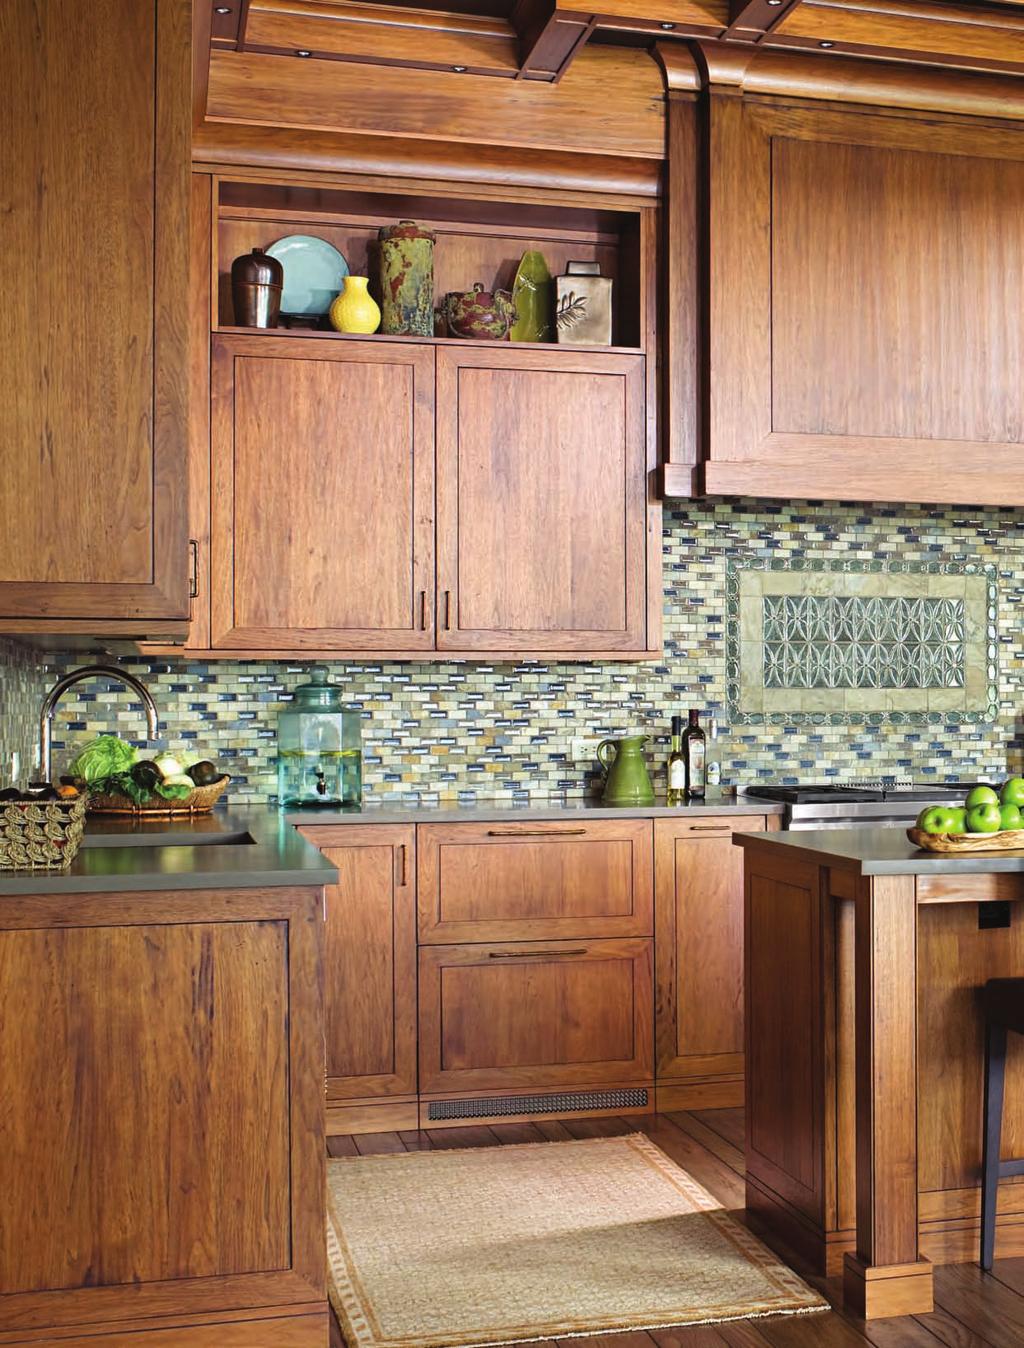 Gleaming butternutwood cabinetry (a type of walnut) gives this polished kitchen natural beauty.